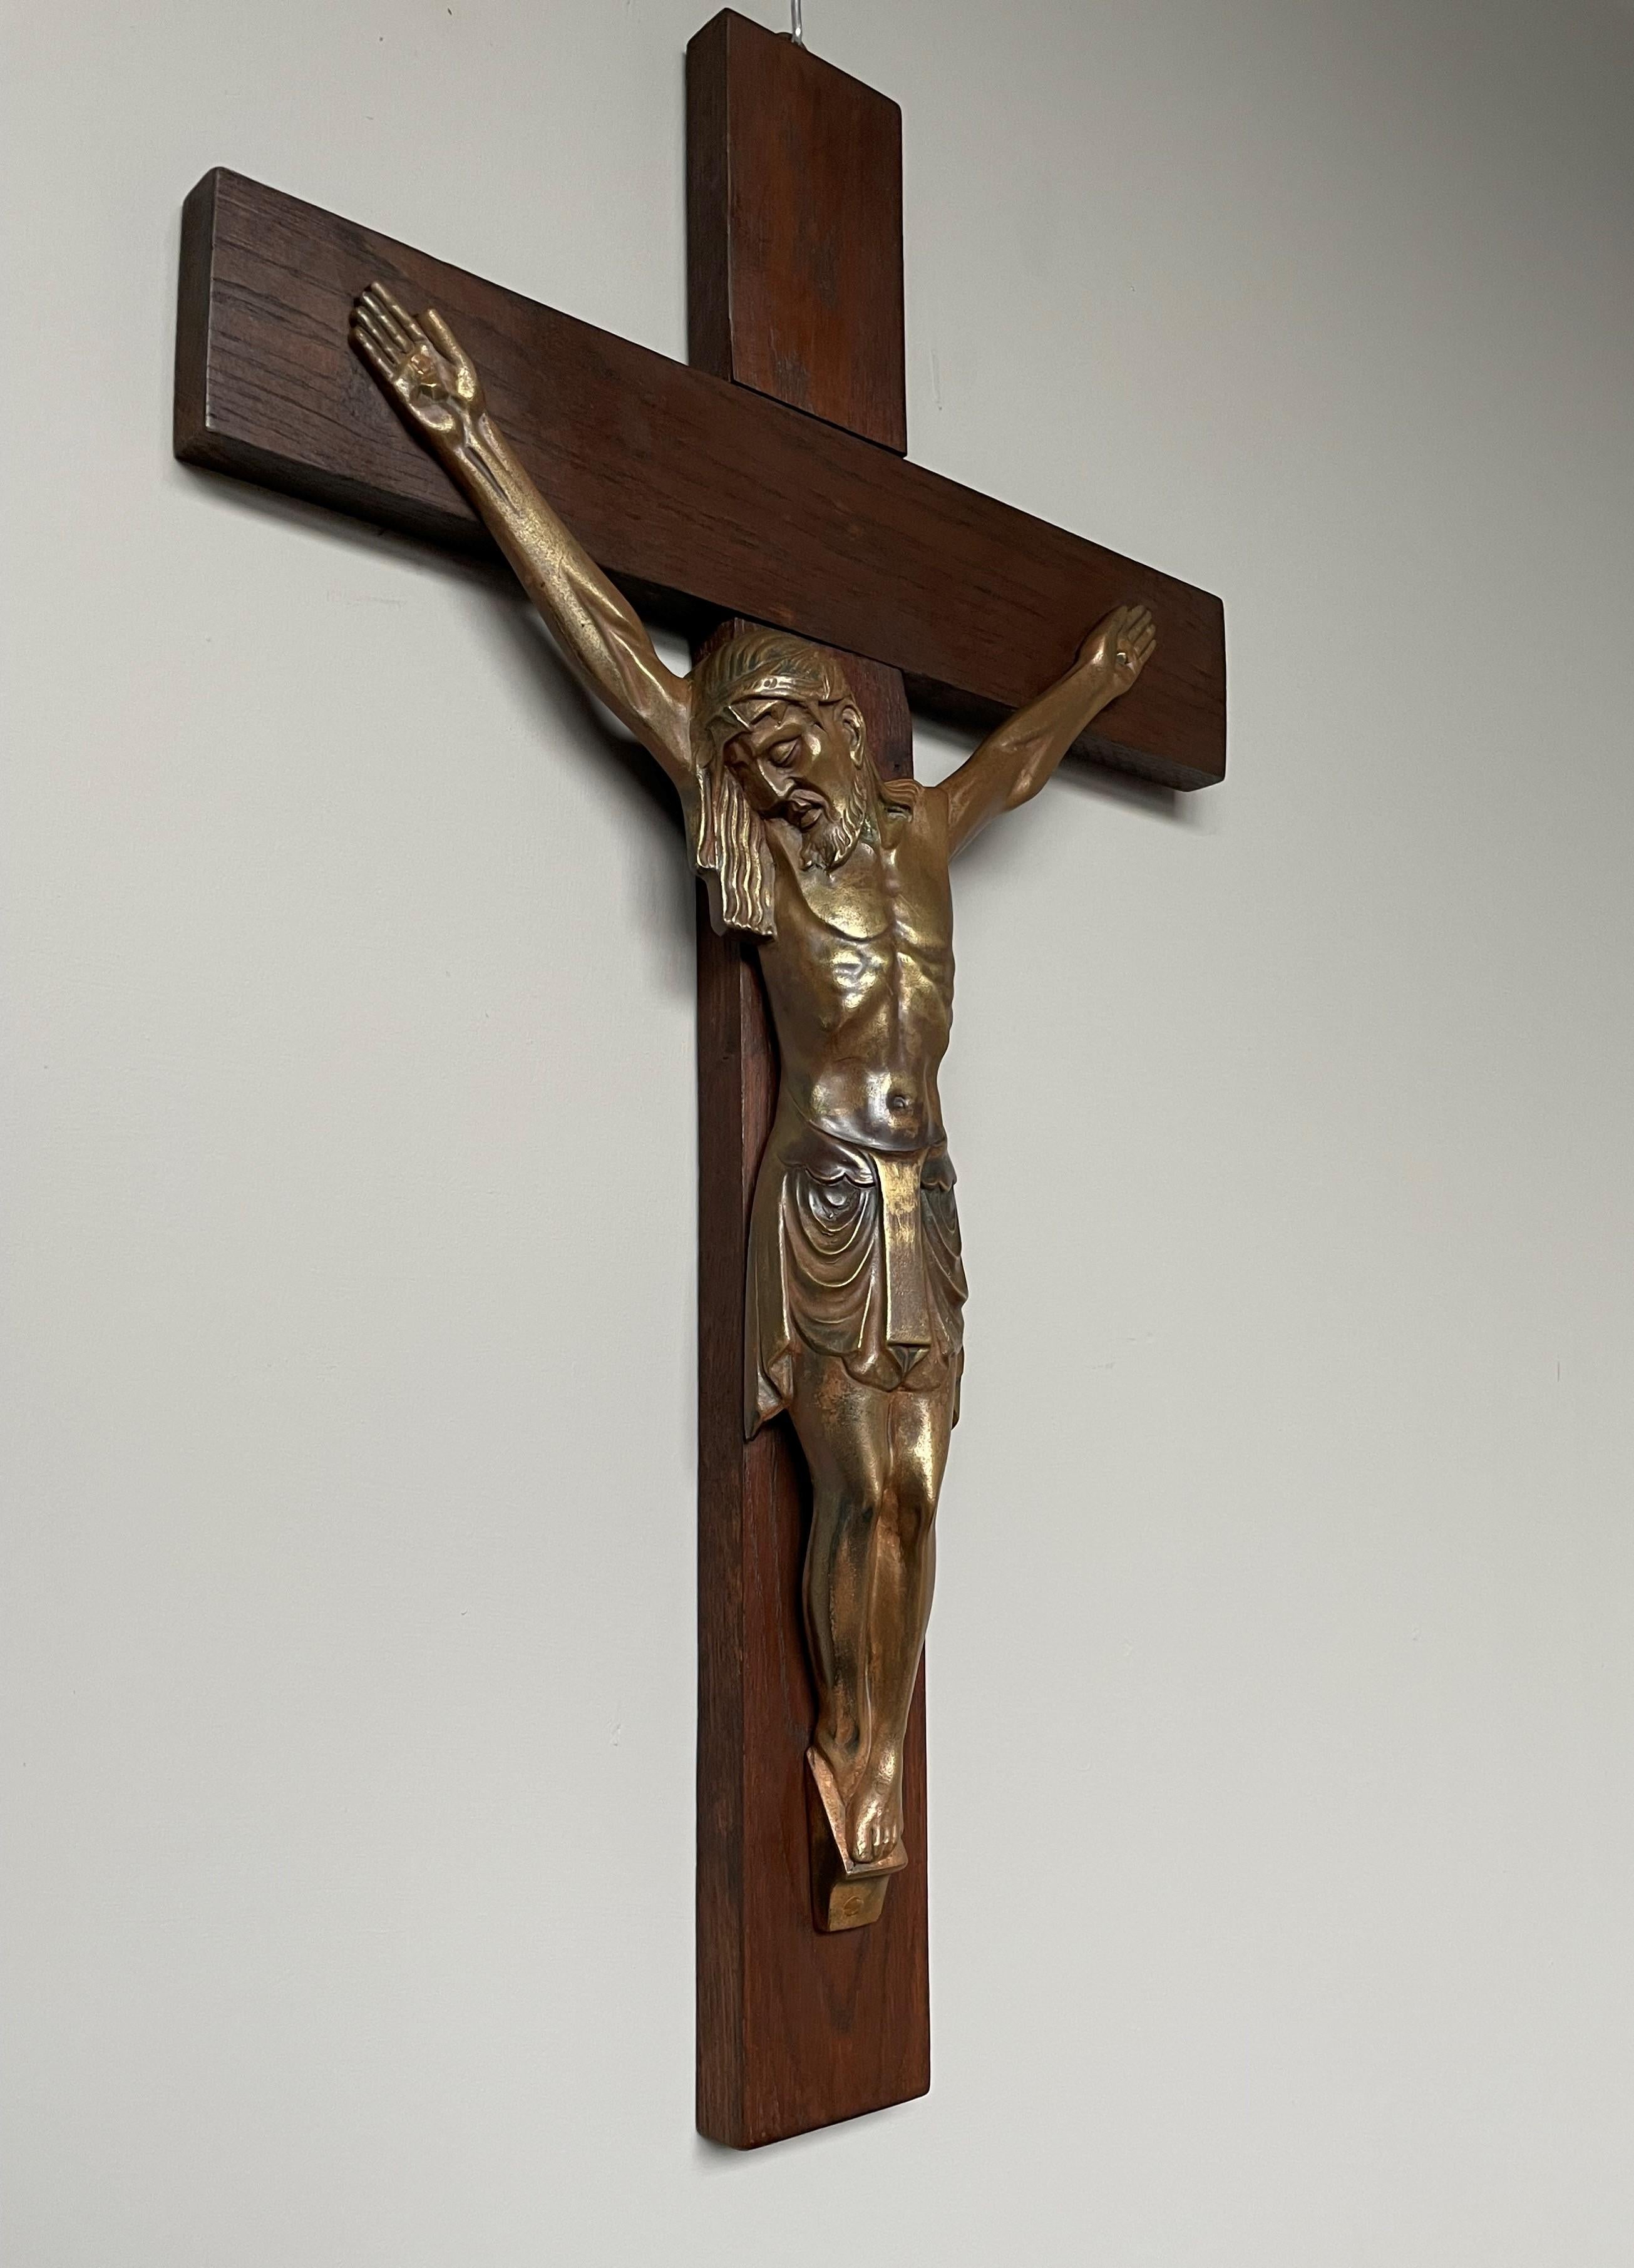 Rare and beautiful gilt bronze corpus of Christ on a wooden cross.

Some crucifixes come with sculptures of Christ in terrible agony, but the stylized Art Deco face of our Lord Jesus on this bronze tells us that He has already 'passed on'. This